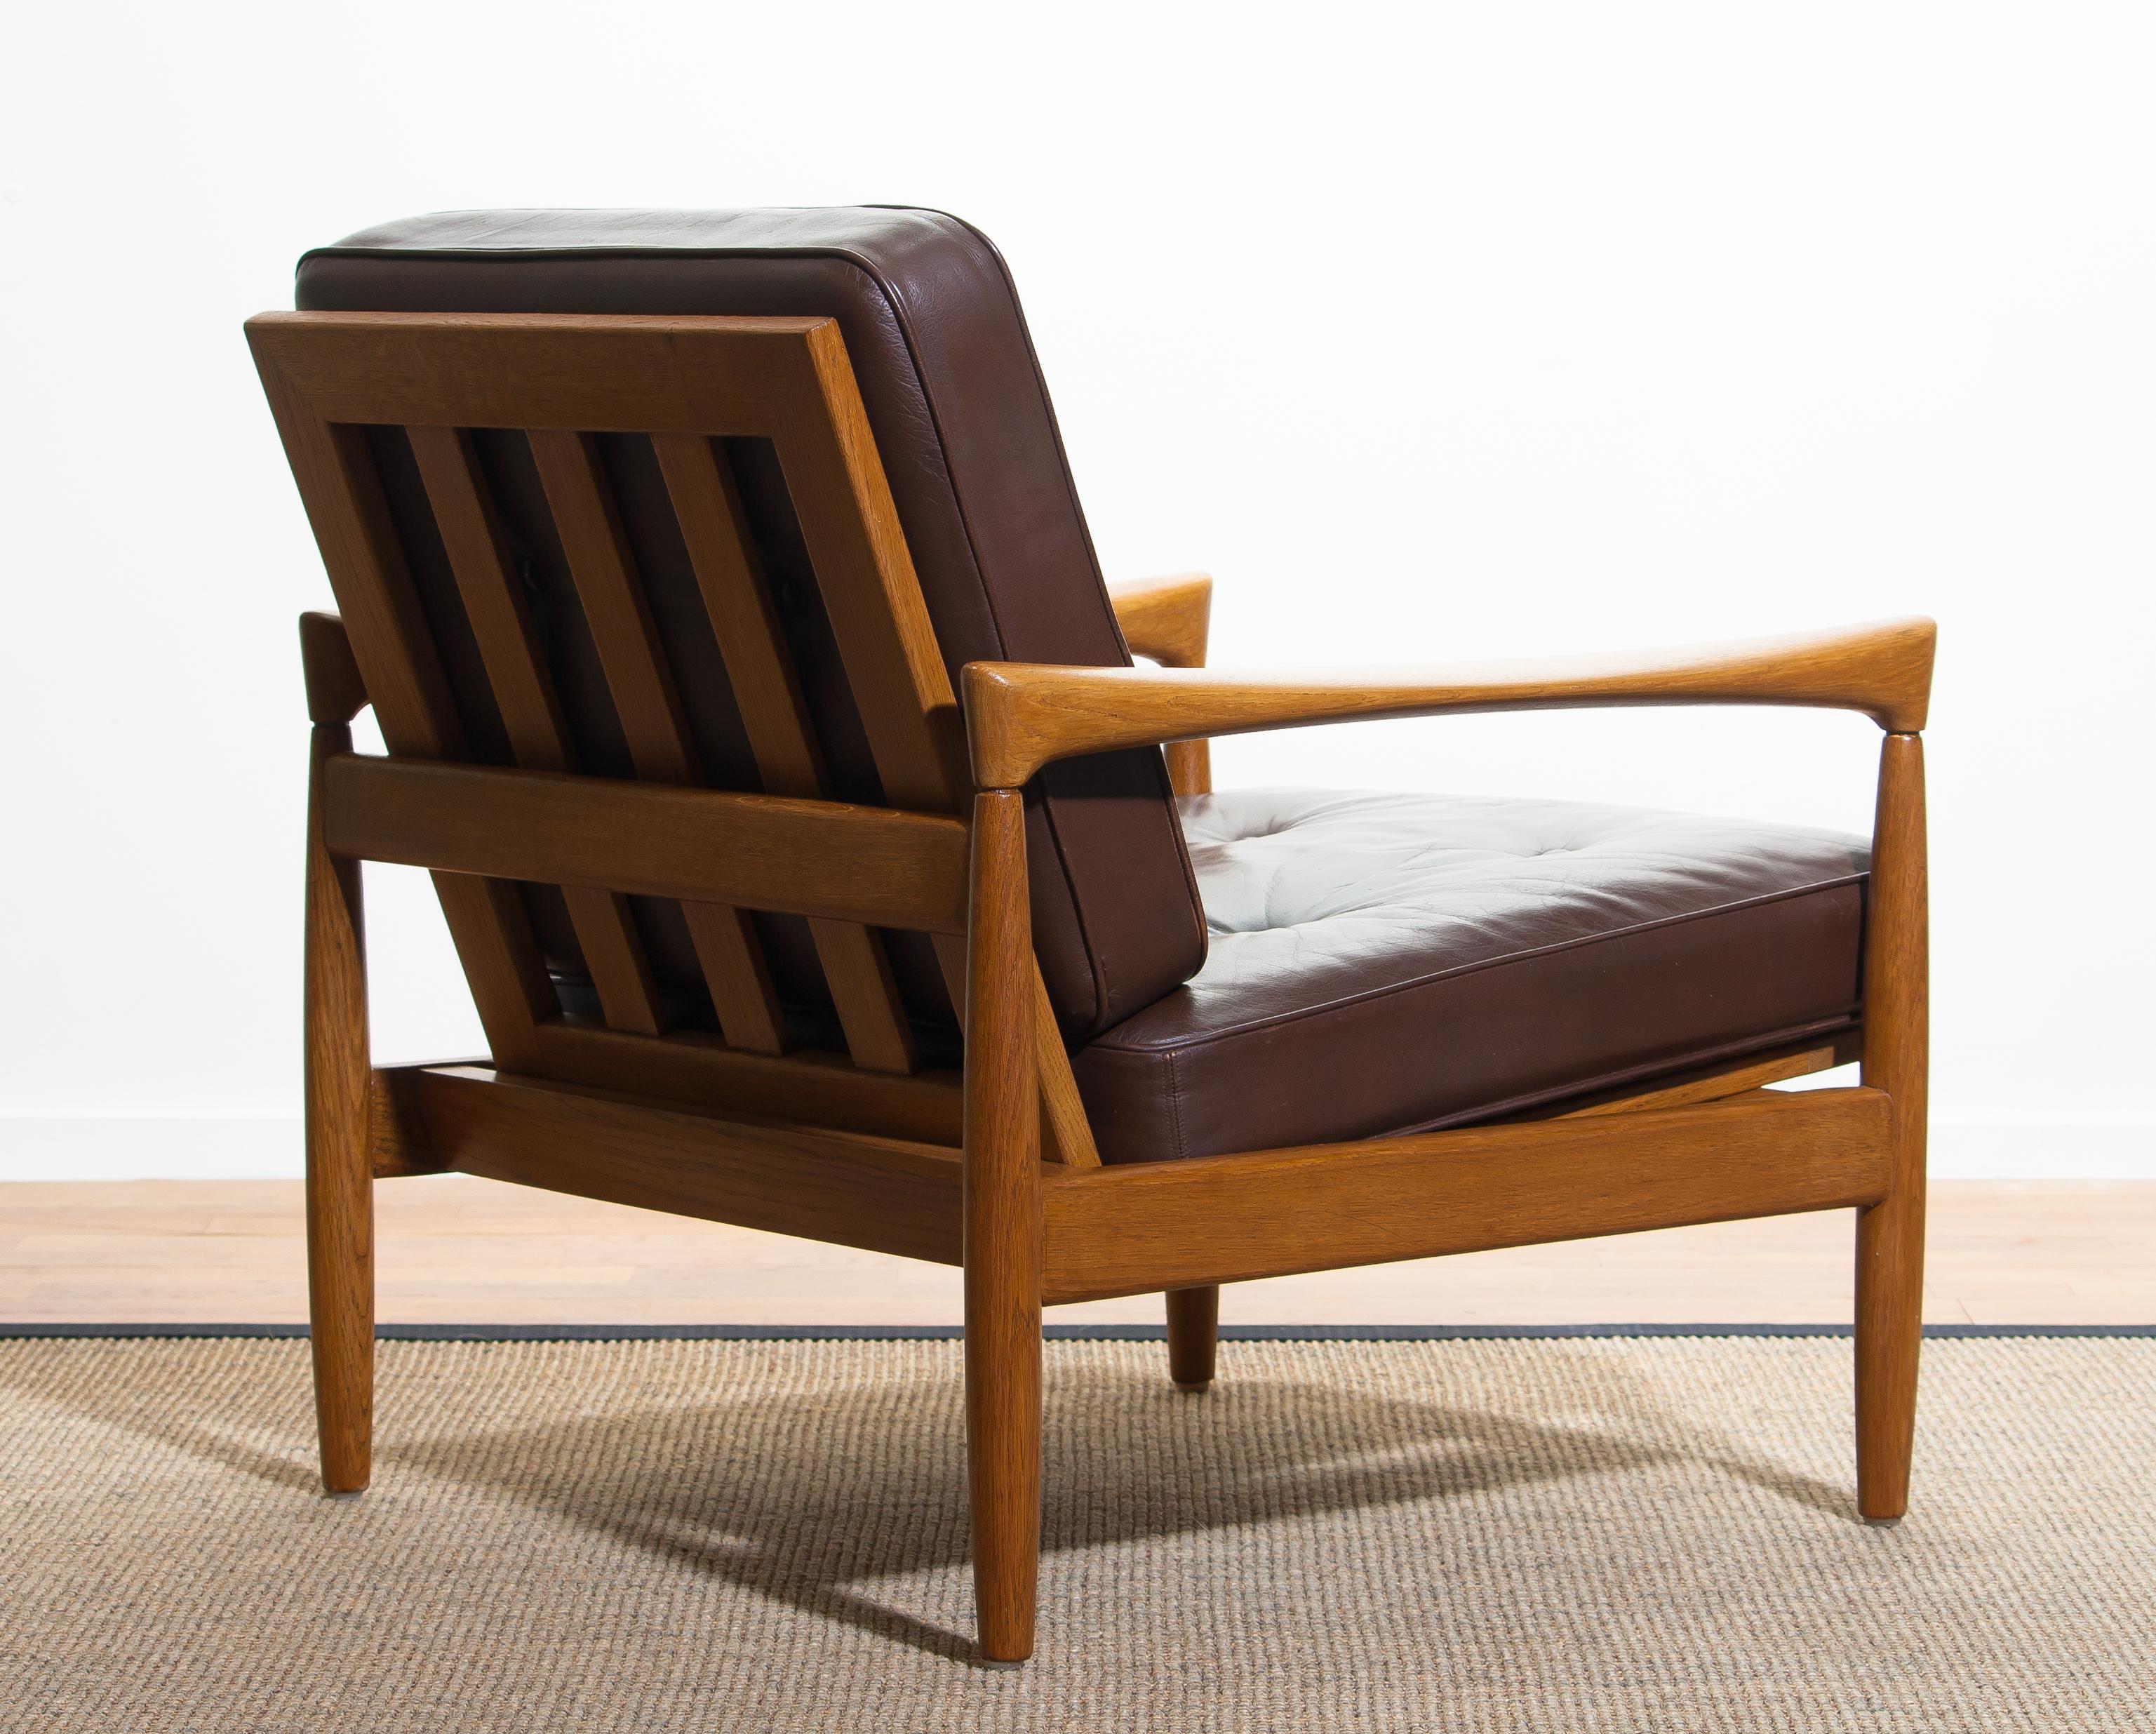 Mid-20th Century 1960s, Oak With Brown Leather Lounge Chair by Erik Wörtz for Bröderna Anderssons